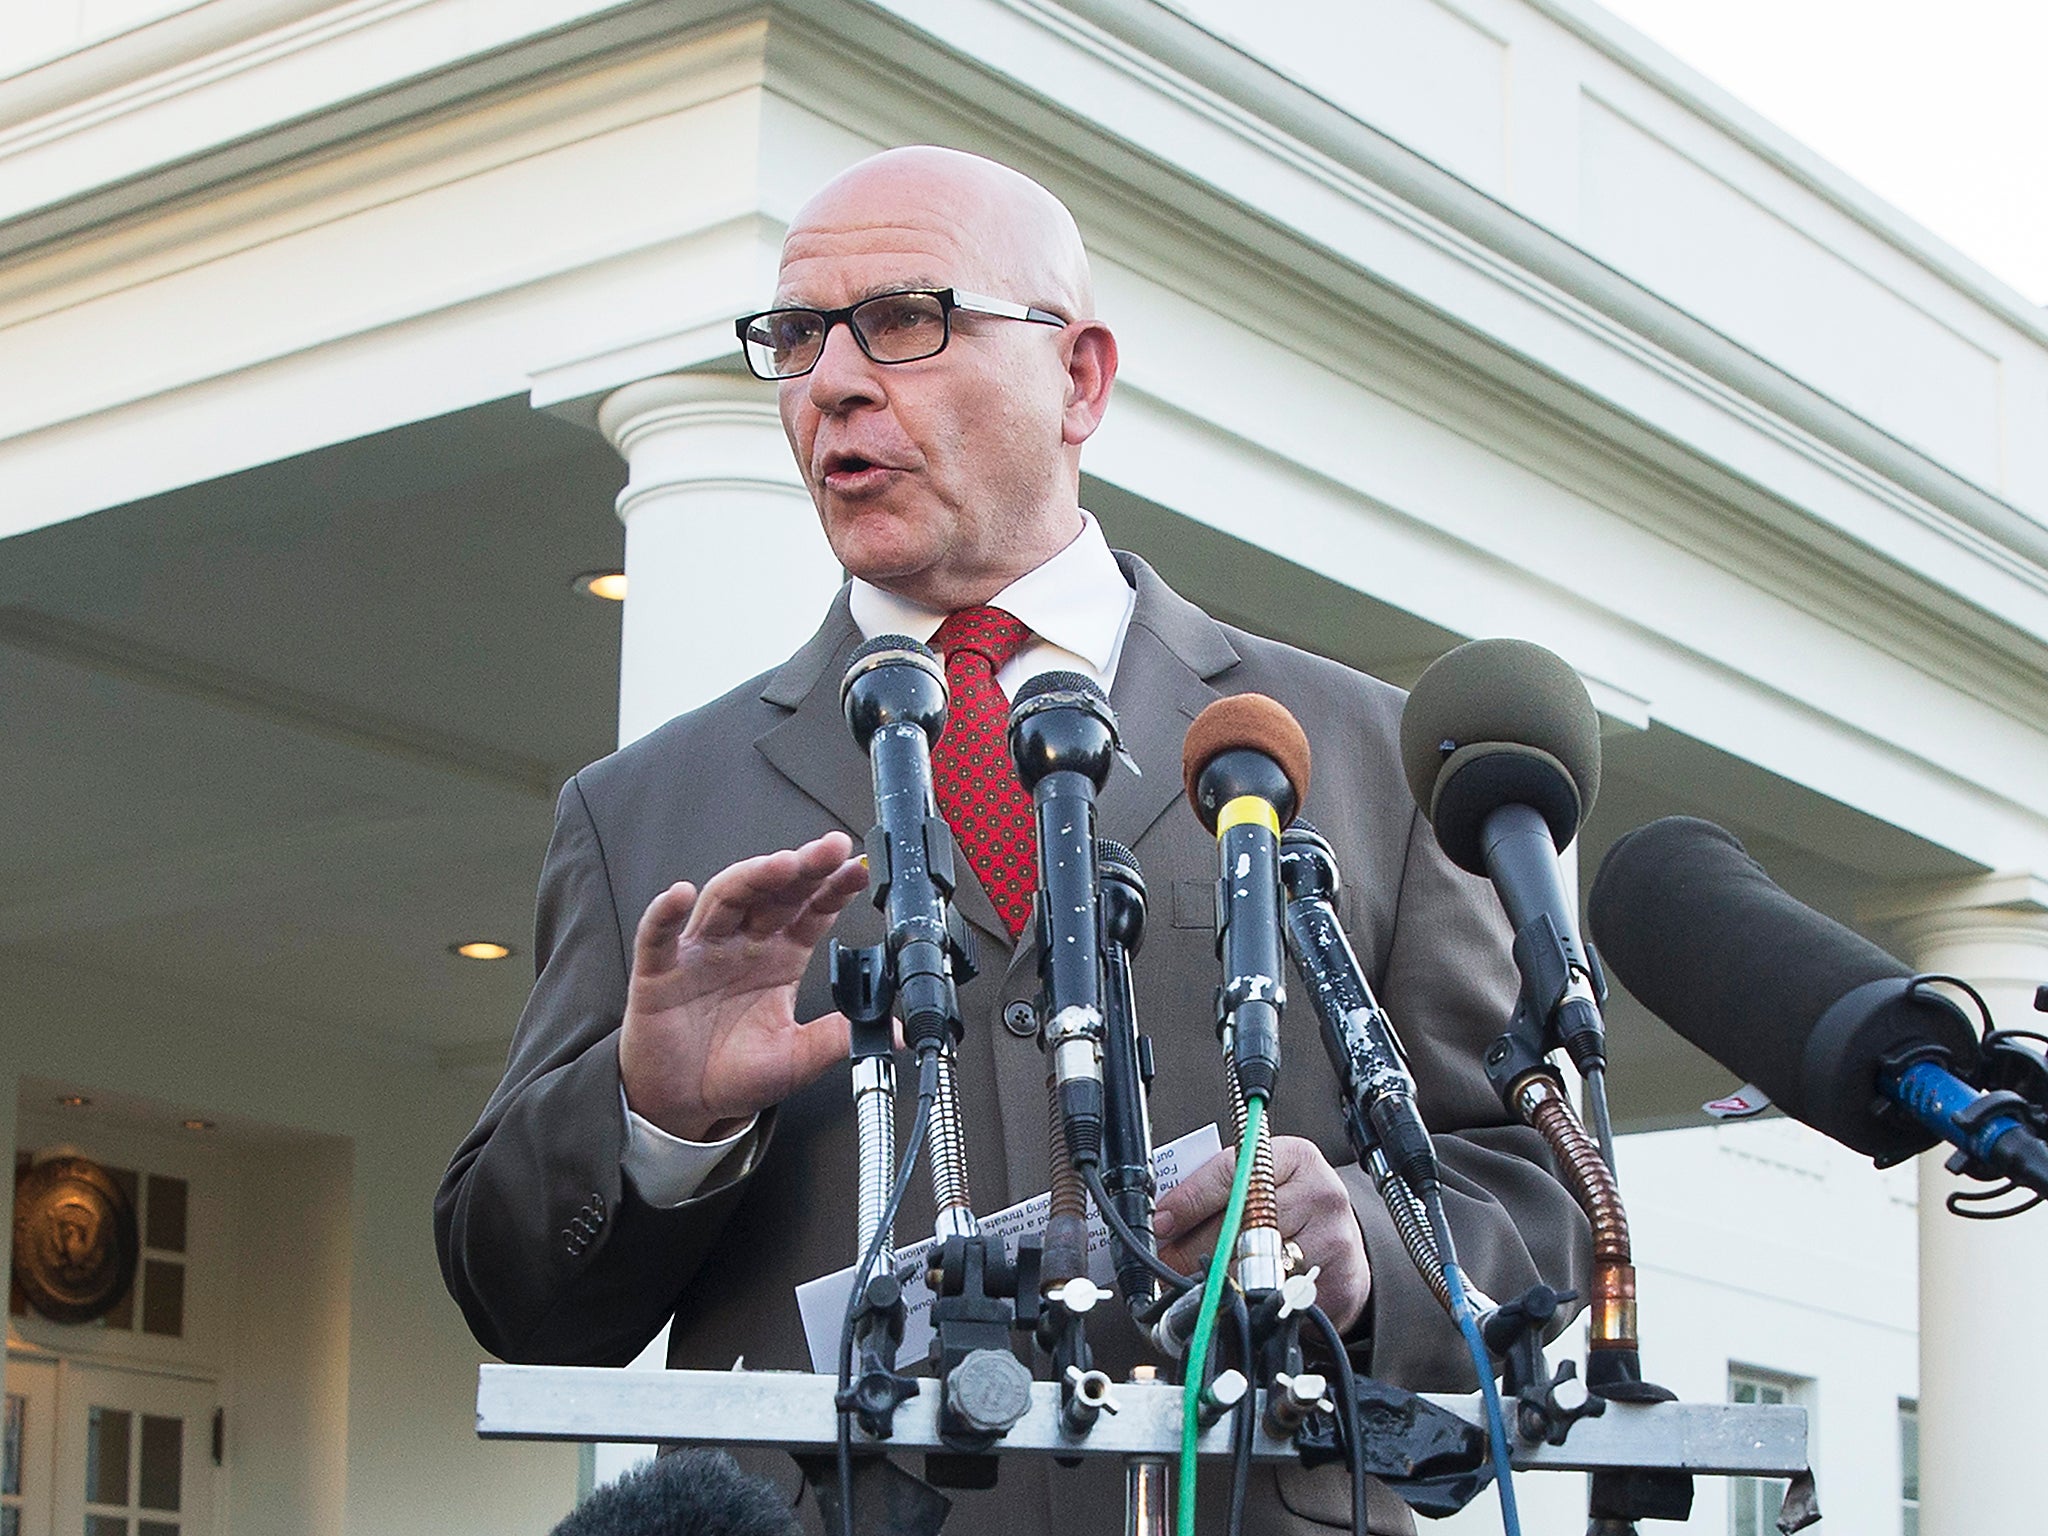 National Security Adviser HR McMaster addressing the media at the White House yesterday